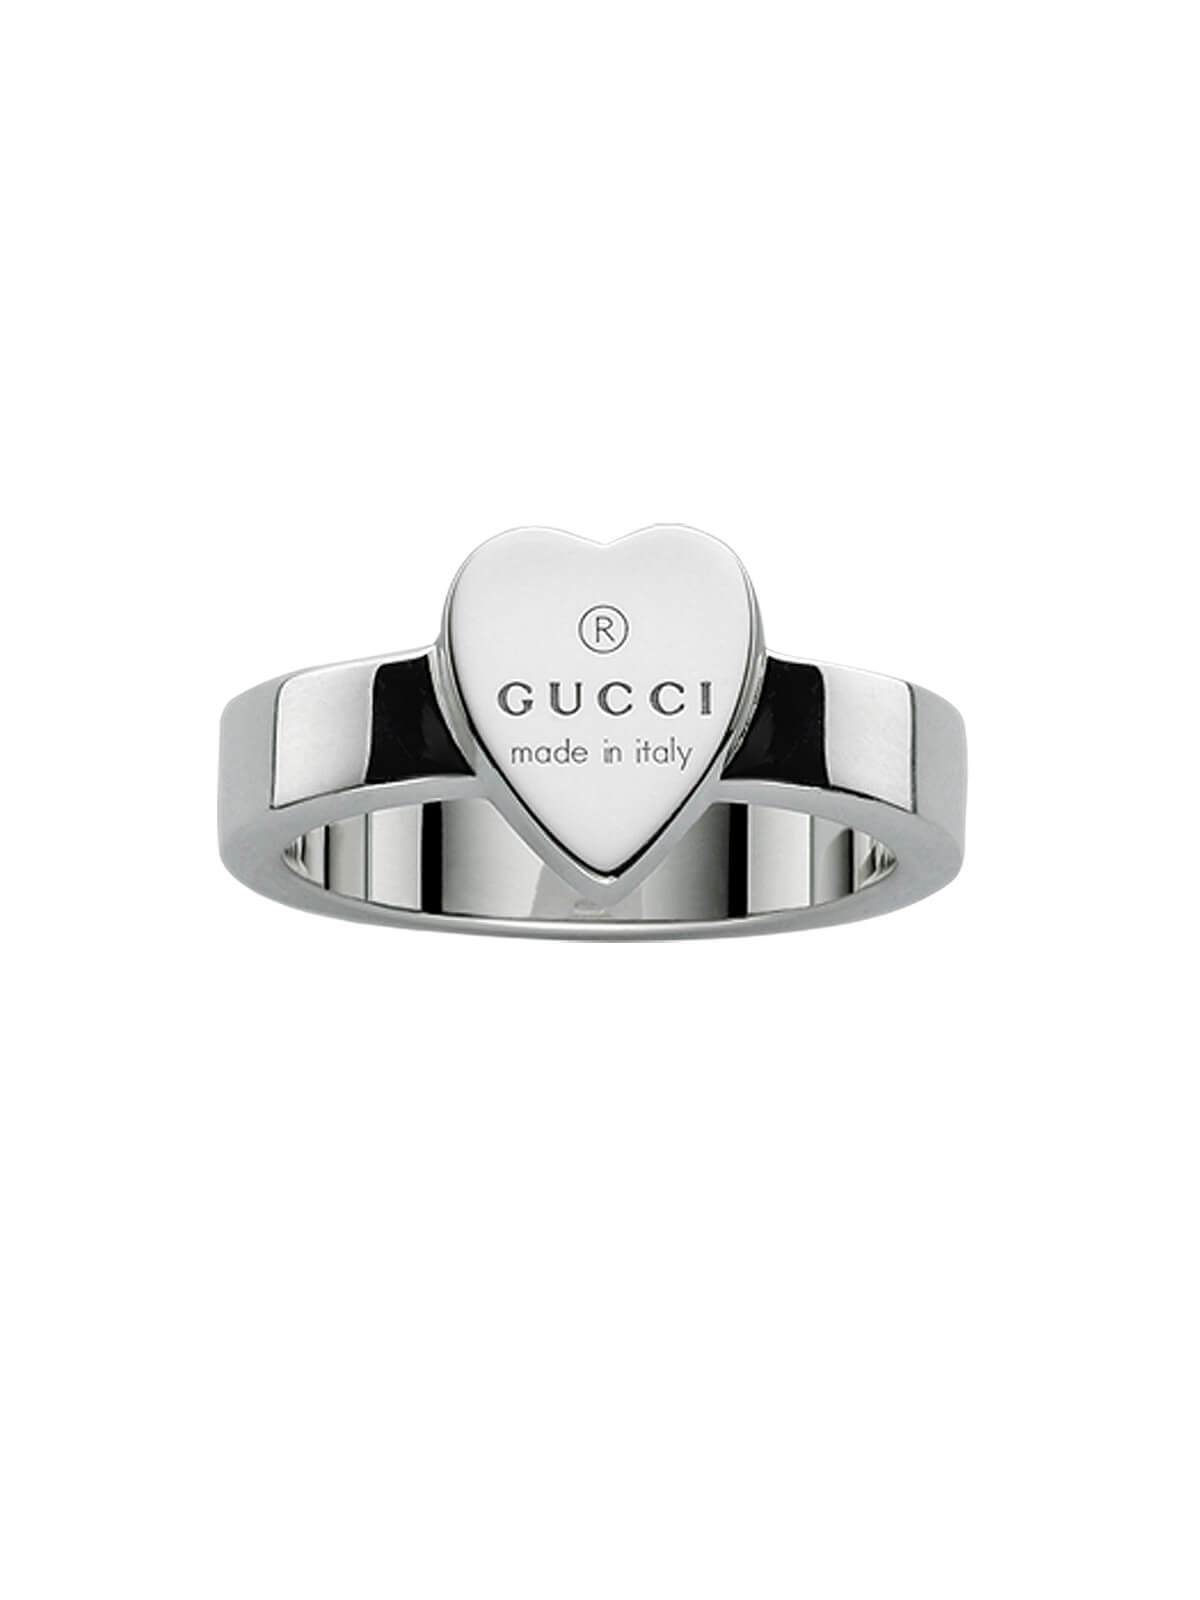 Gucci Trademark Heart Ring in Silver - Size J YBC223867001009